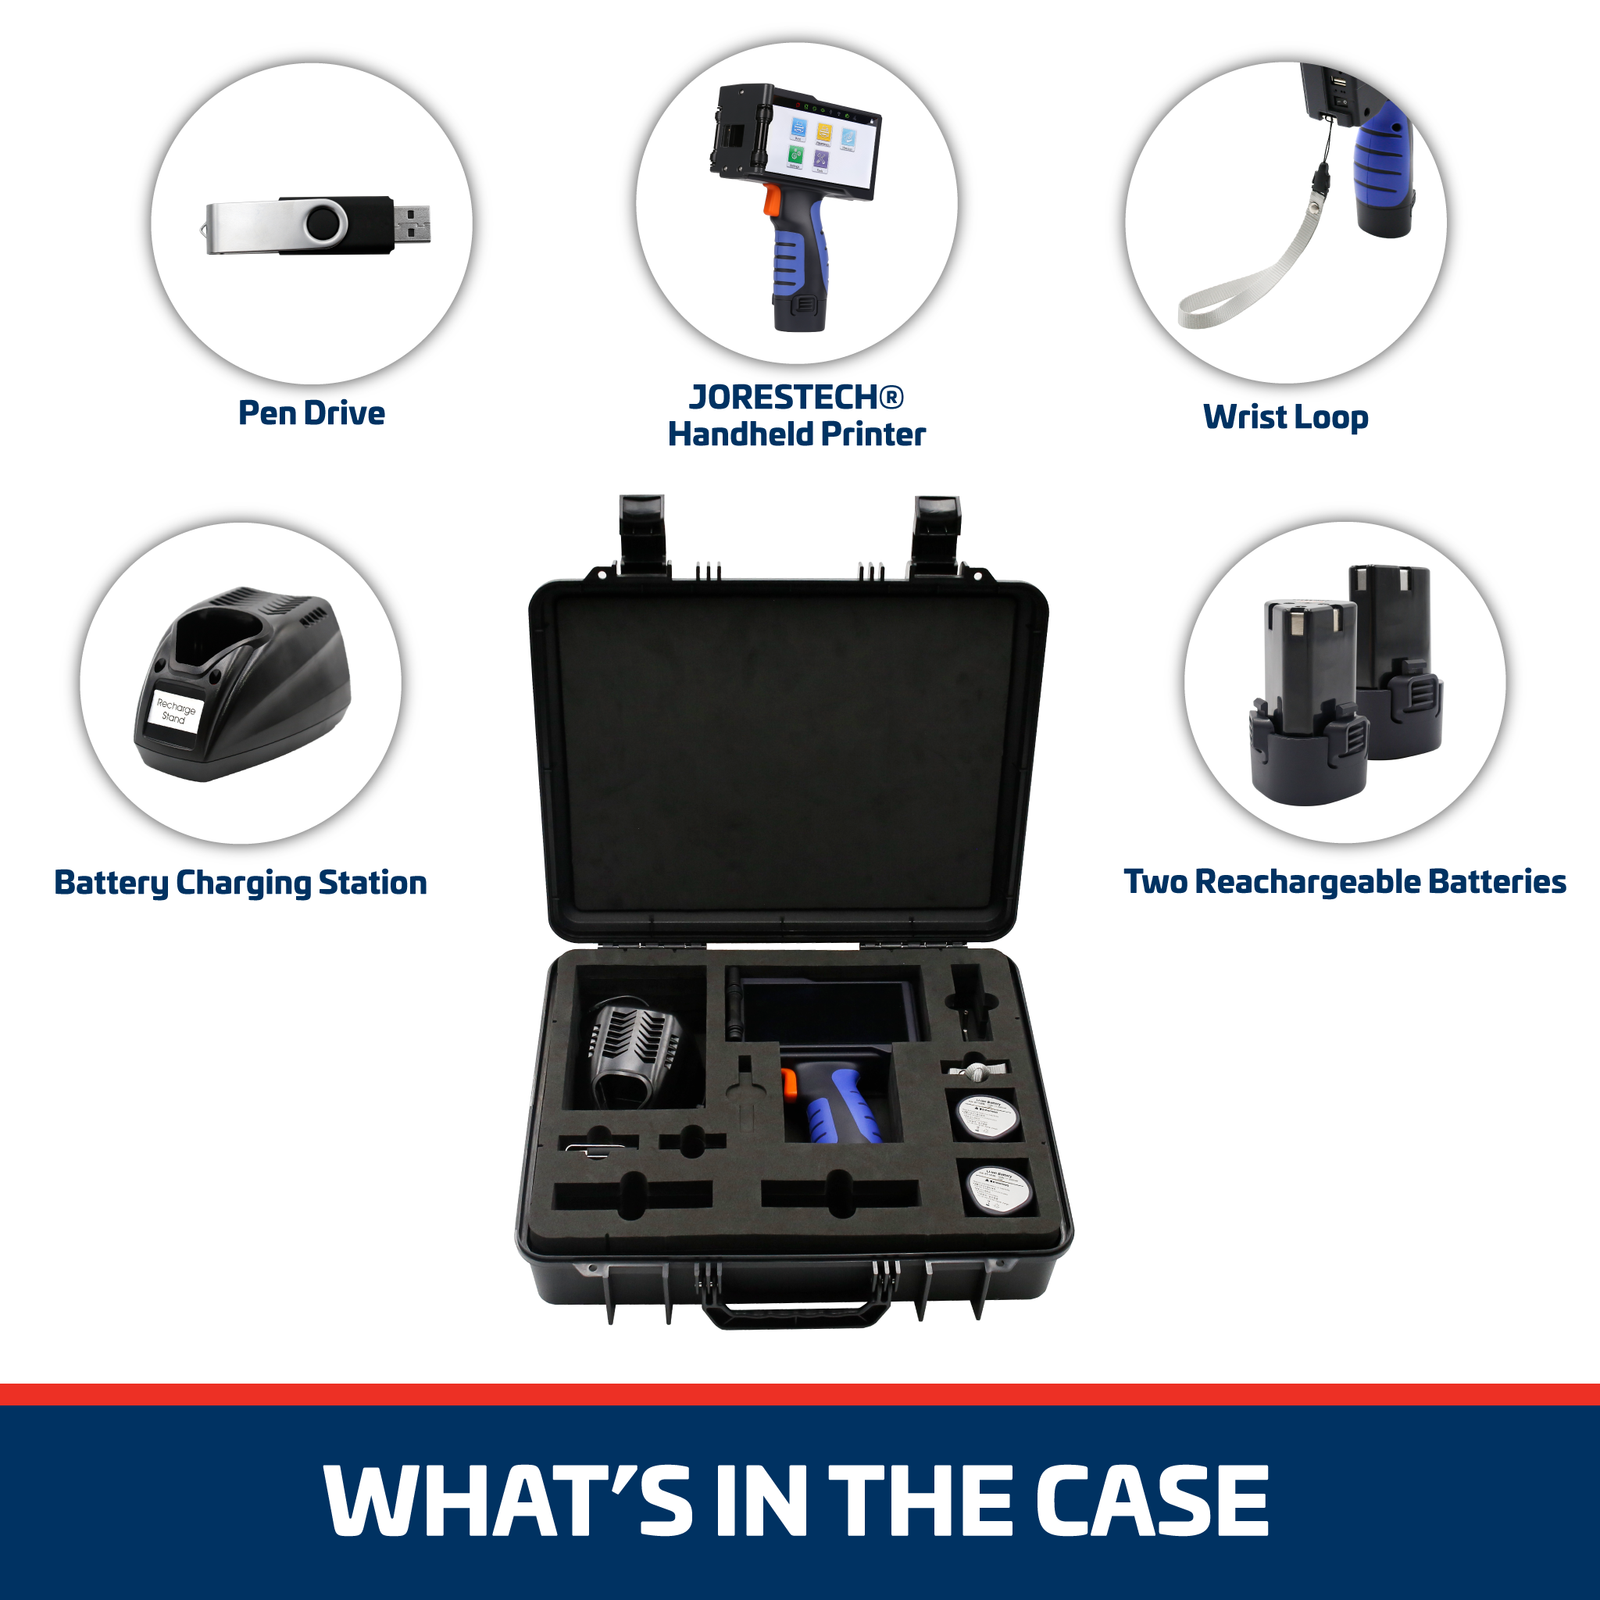 Shows what is inside the black carryon hard case. Zoomed ins show the battery charging station, a pen drive, the JORES TECHNOLOGIES® TIJ handheld inkjet coder, a wrist loop, and 2 rechargeable batteries